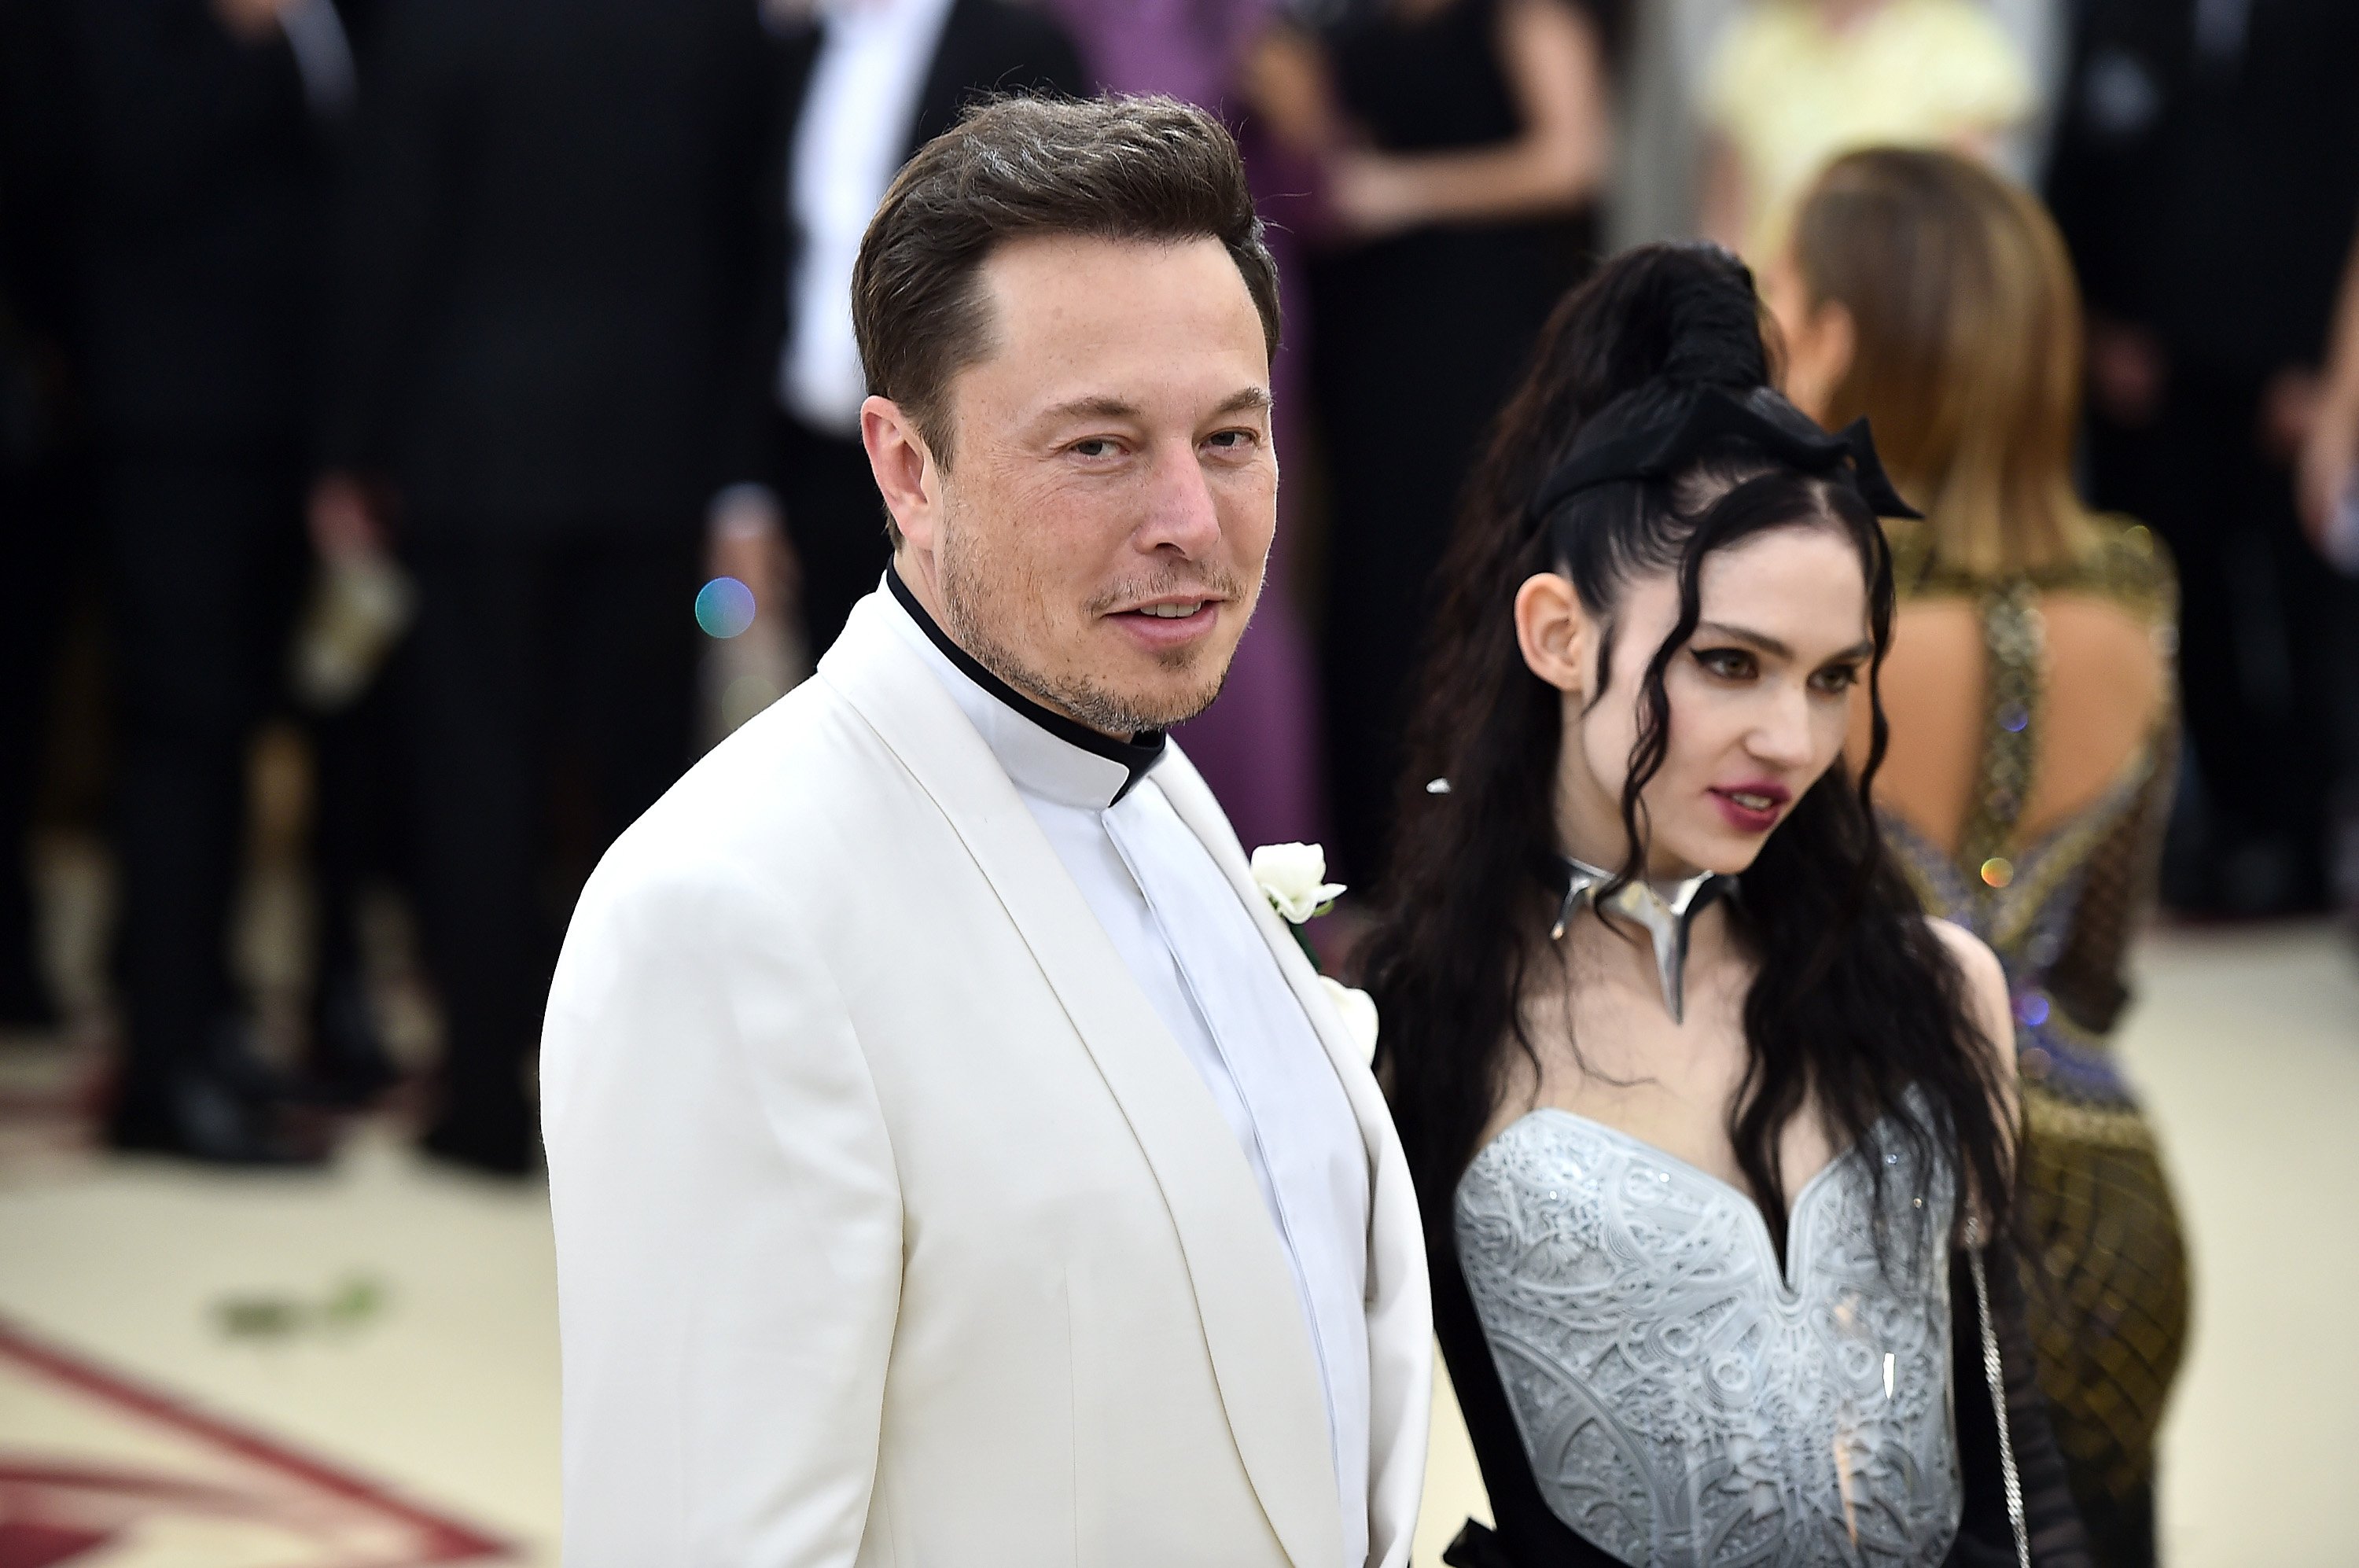 Elon Musk and Grimes attend the Heavenly Bodies: Fashion & The Catholic Imagination Costume Institute Gala at The Metropolitan Museum of Art on May 7, 2018, in New York City. | Source: Getty Images